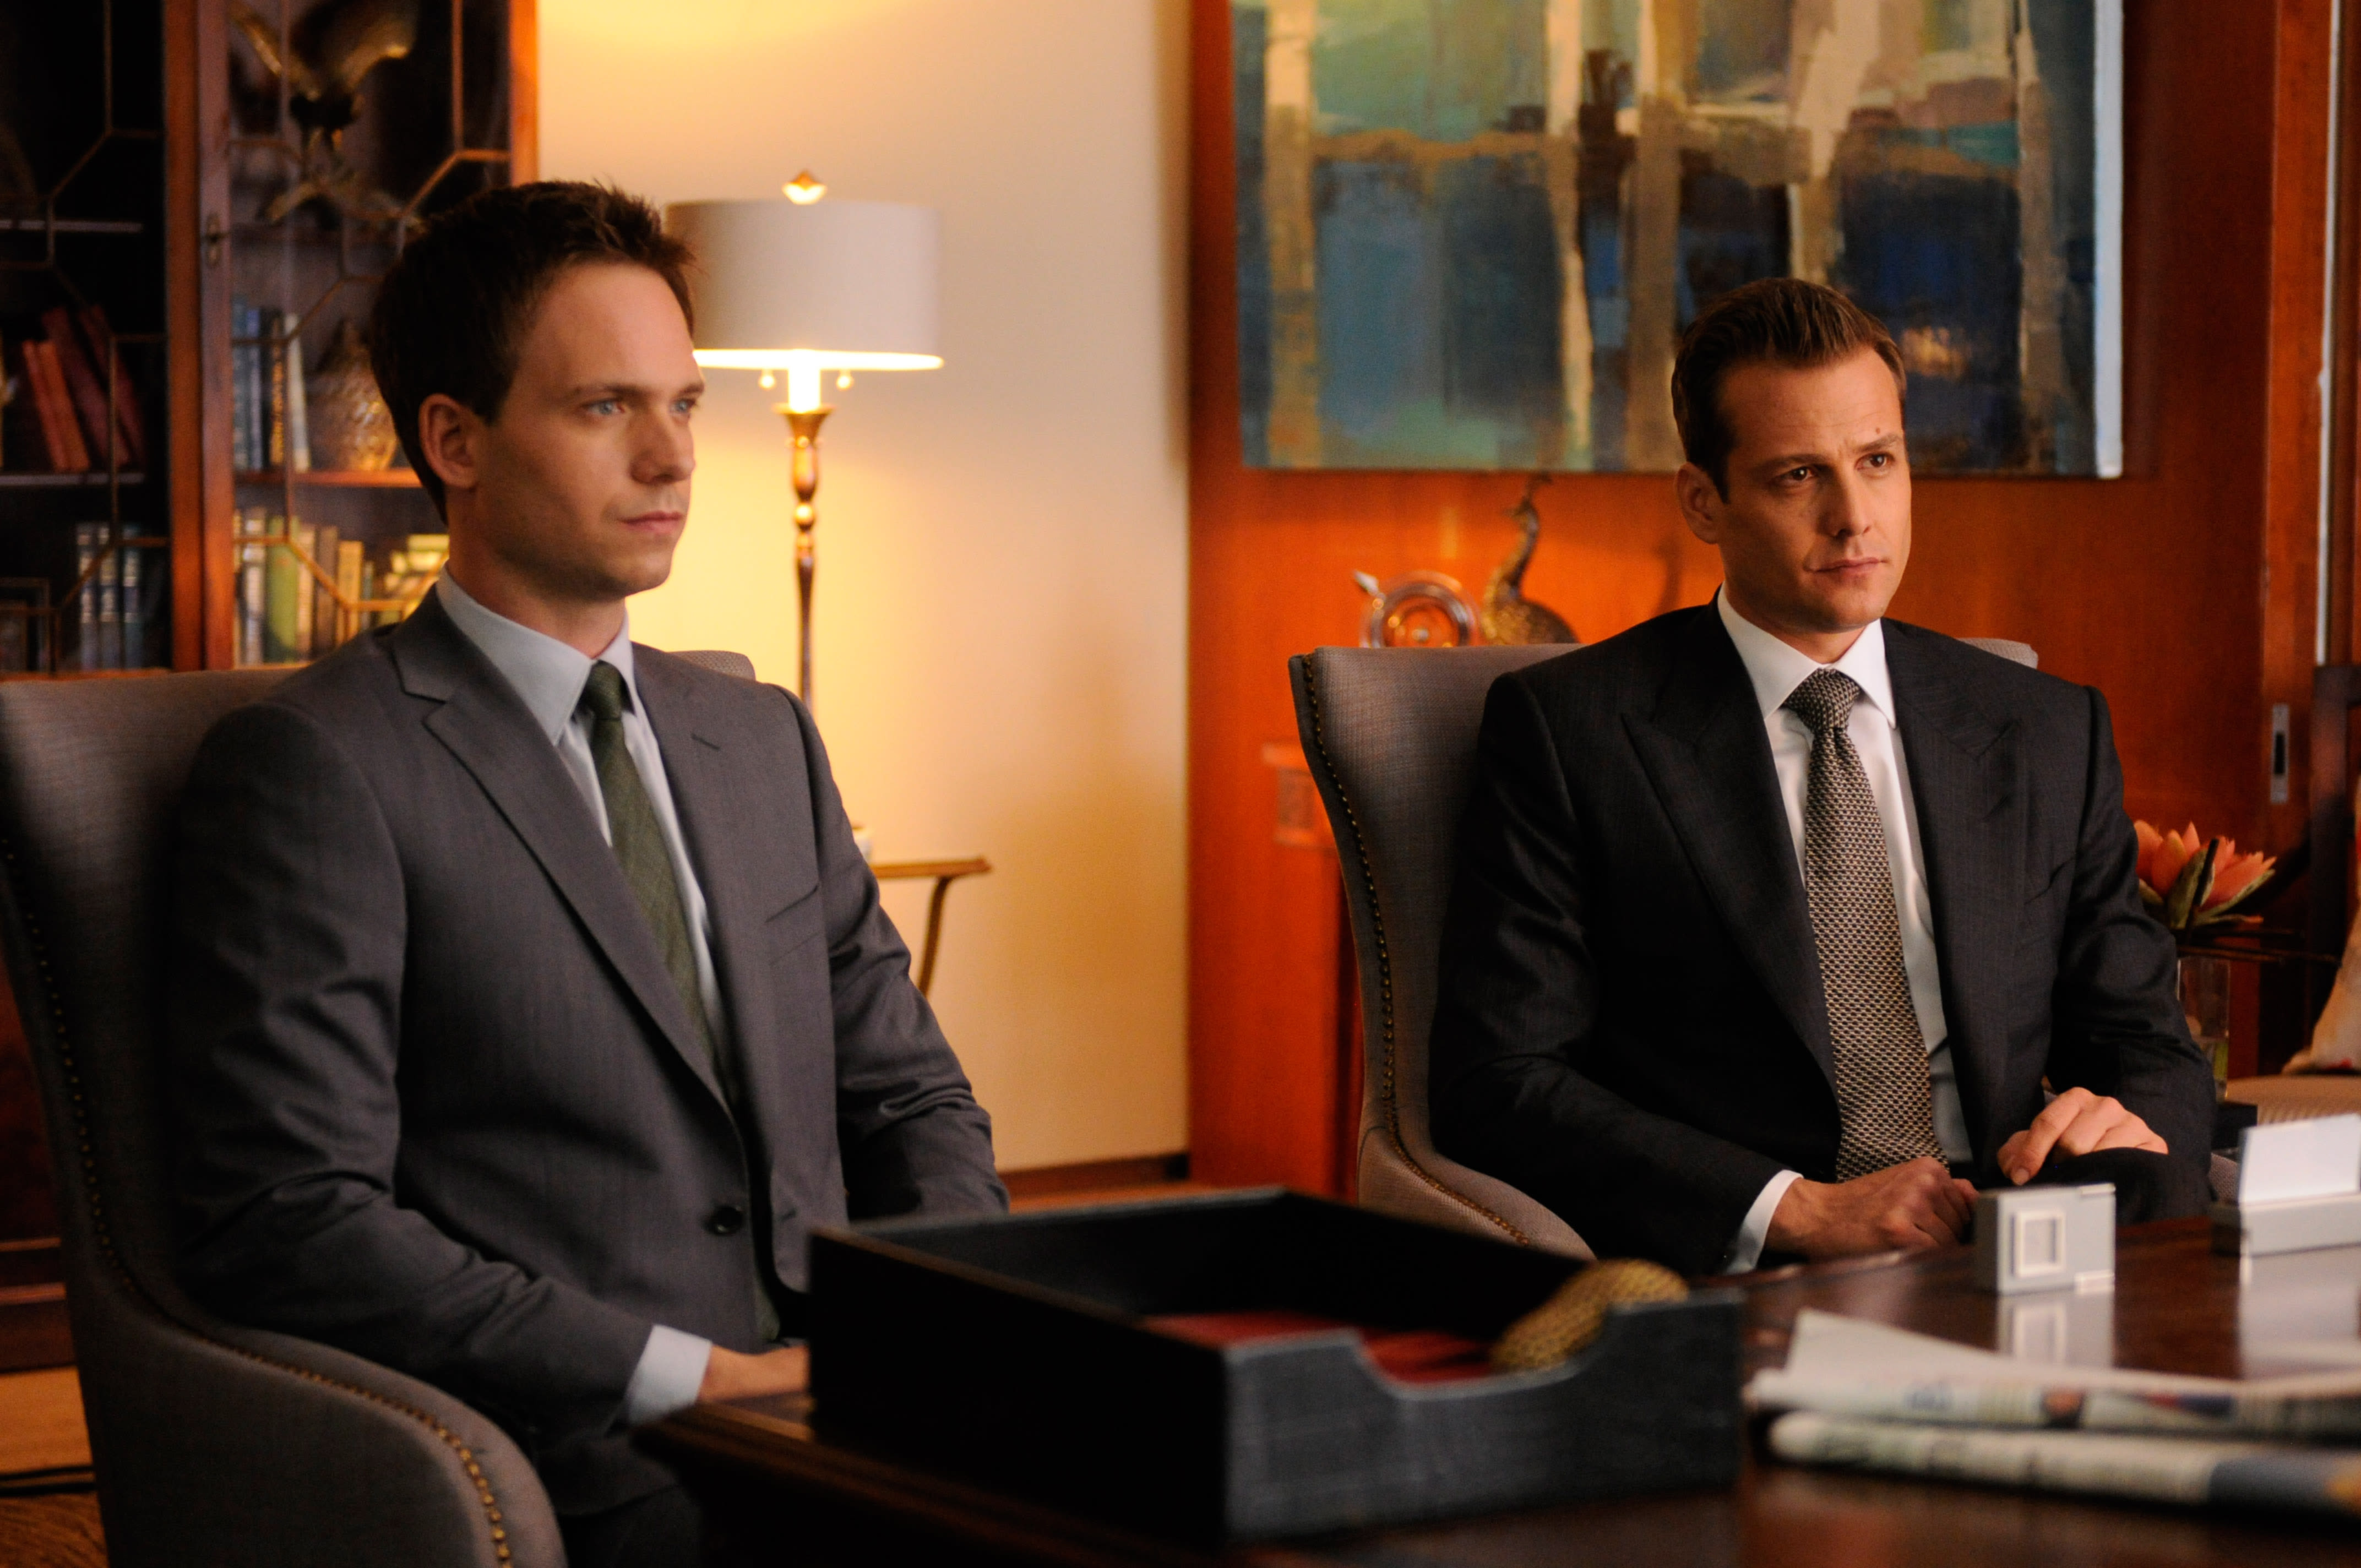 ‘Suits’ Cast Talk Landing Roles In USA Network Legal Drama & More Revelations From ATX Panel